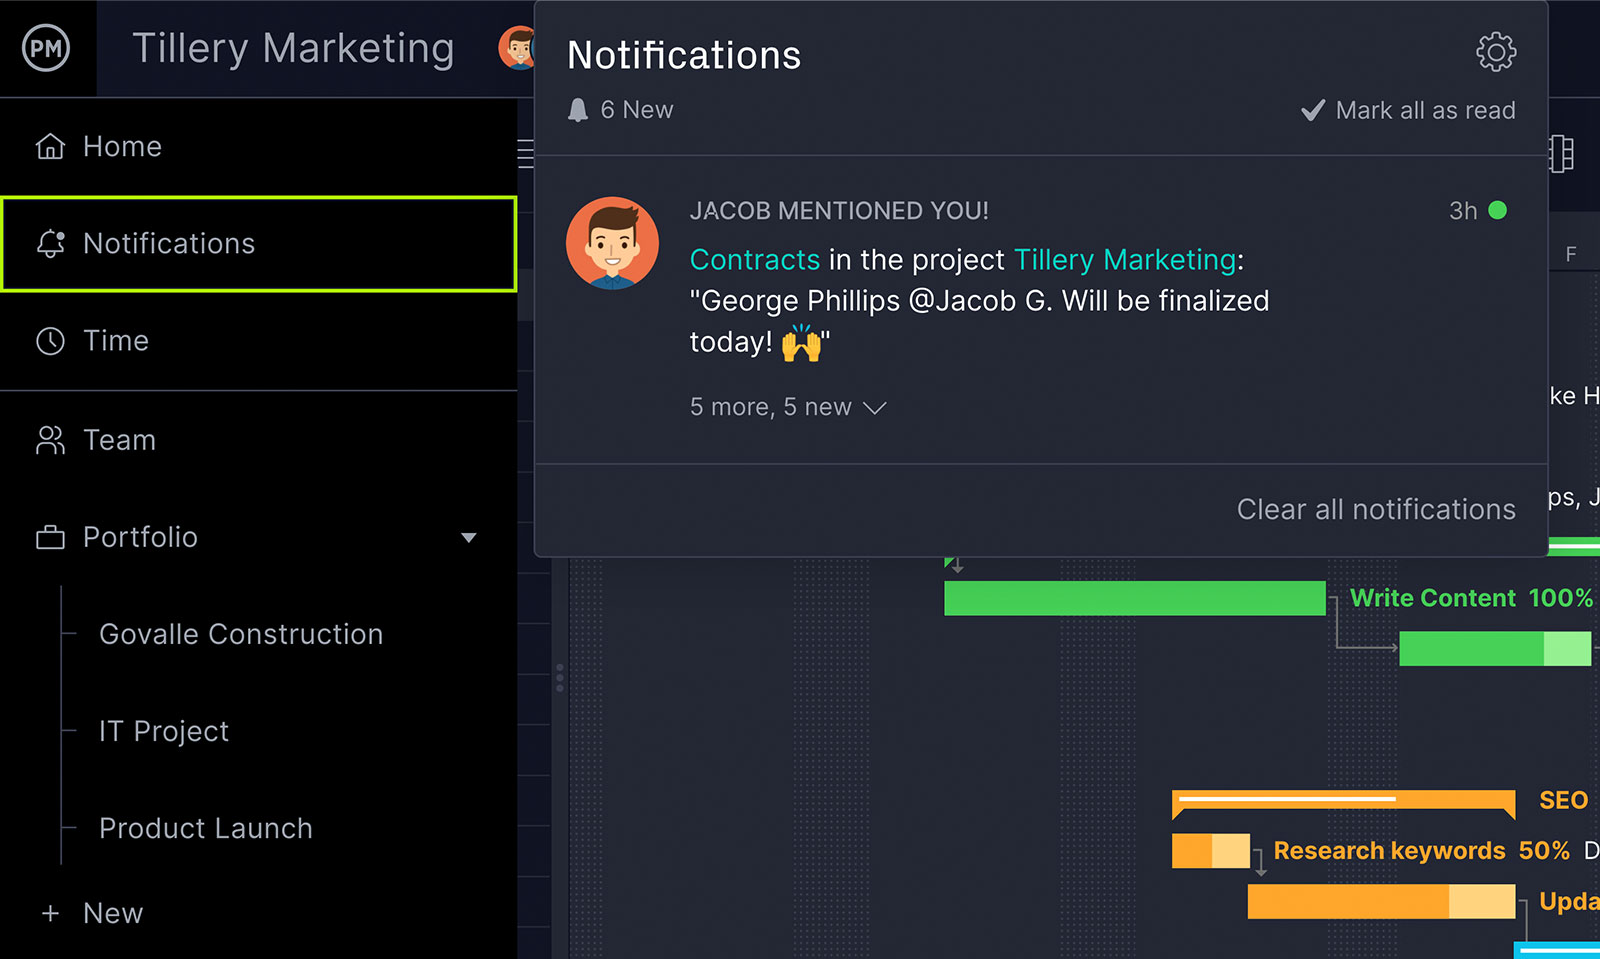 ProjectManager is a product management software with live notifications and email alerts